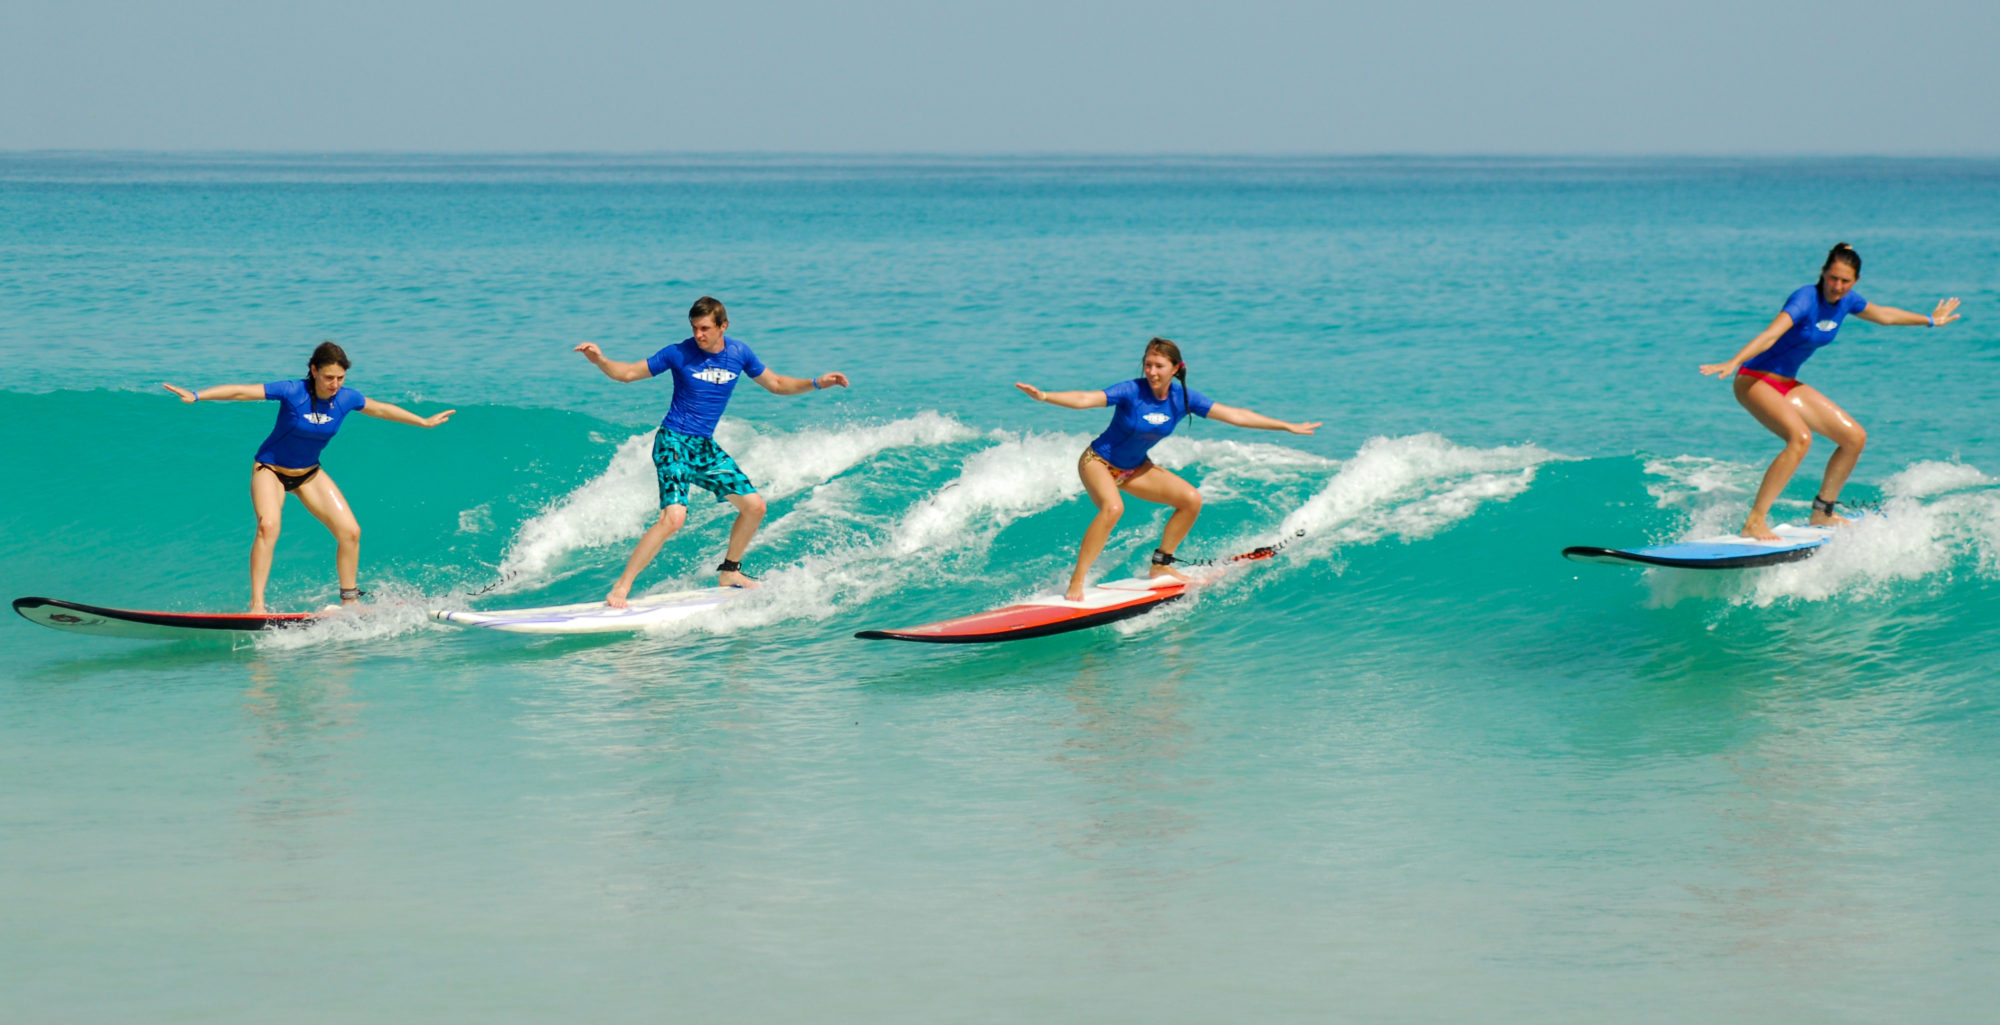 Sardinia Surfing Course: Learn to Surf in Sardinia, get Surfing Lessons in South of Sardinia